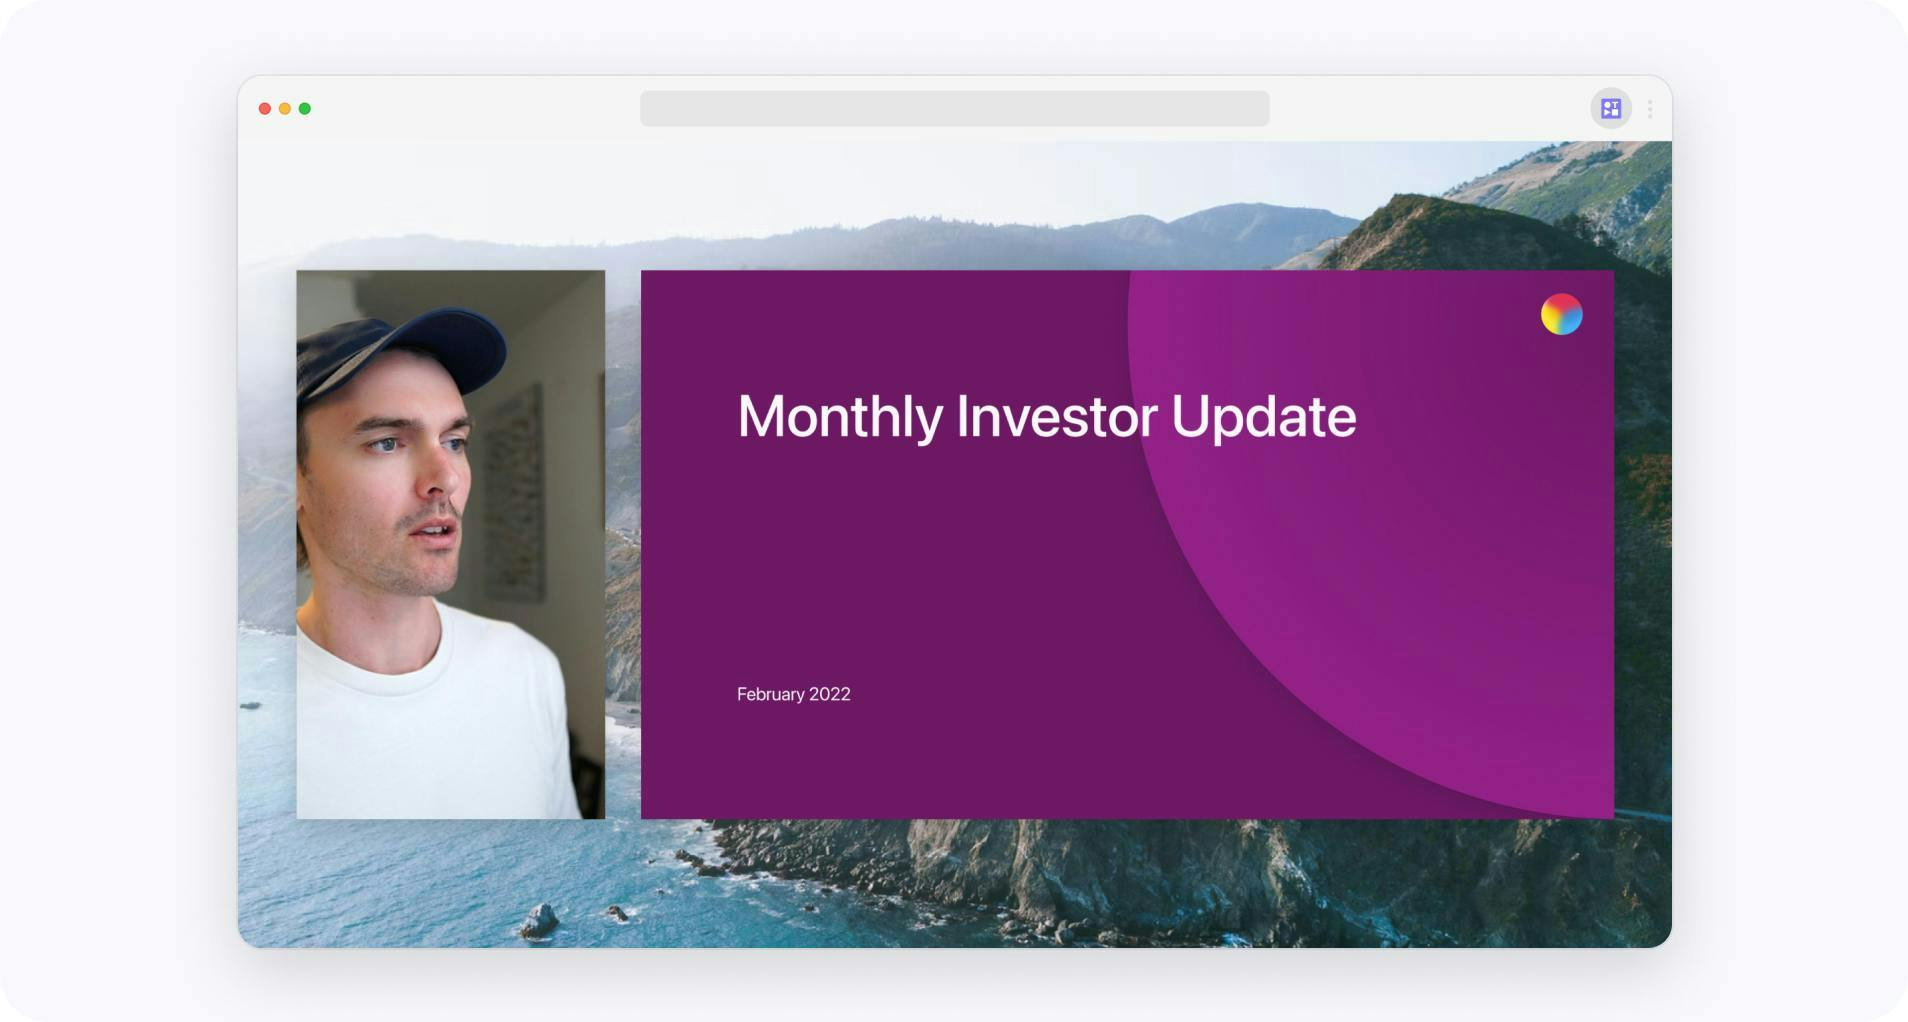 Record investor update video from web browser